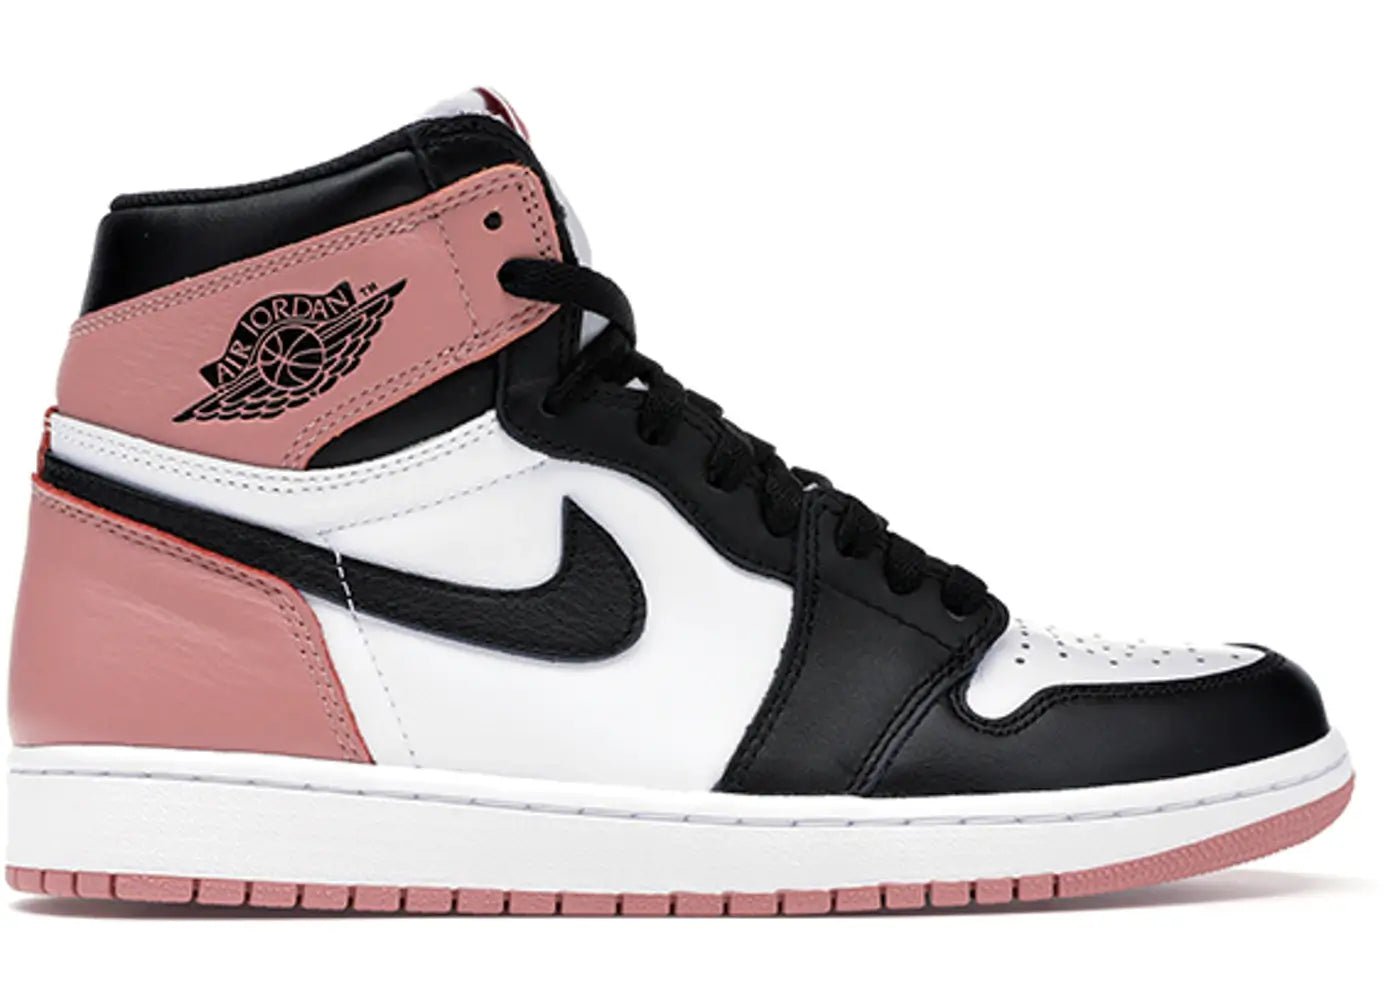 Where to Buy Nike Air Jordan 1 Retro High “Rust Pink” Shoelaces - LaceSpace